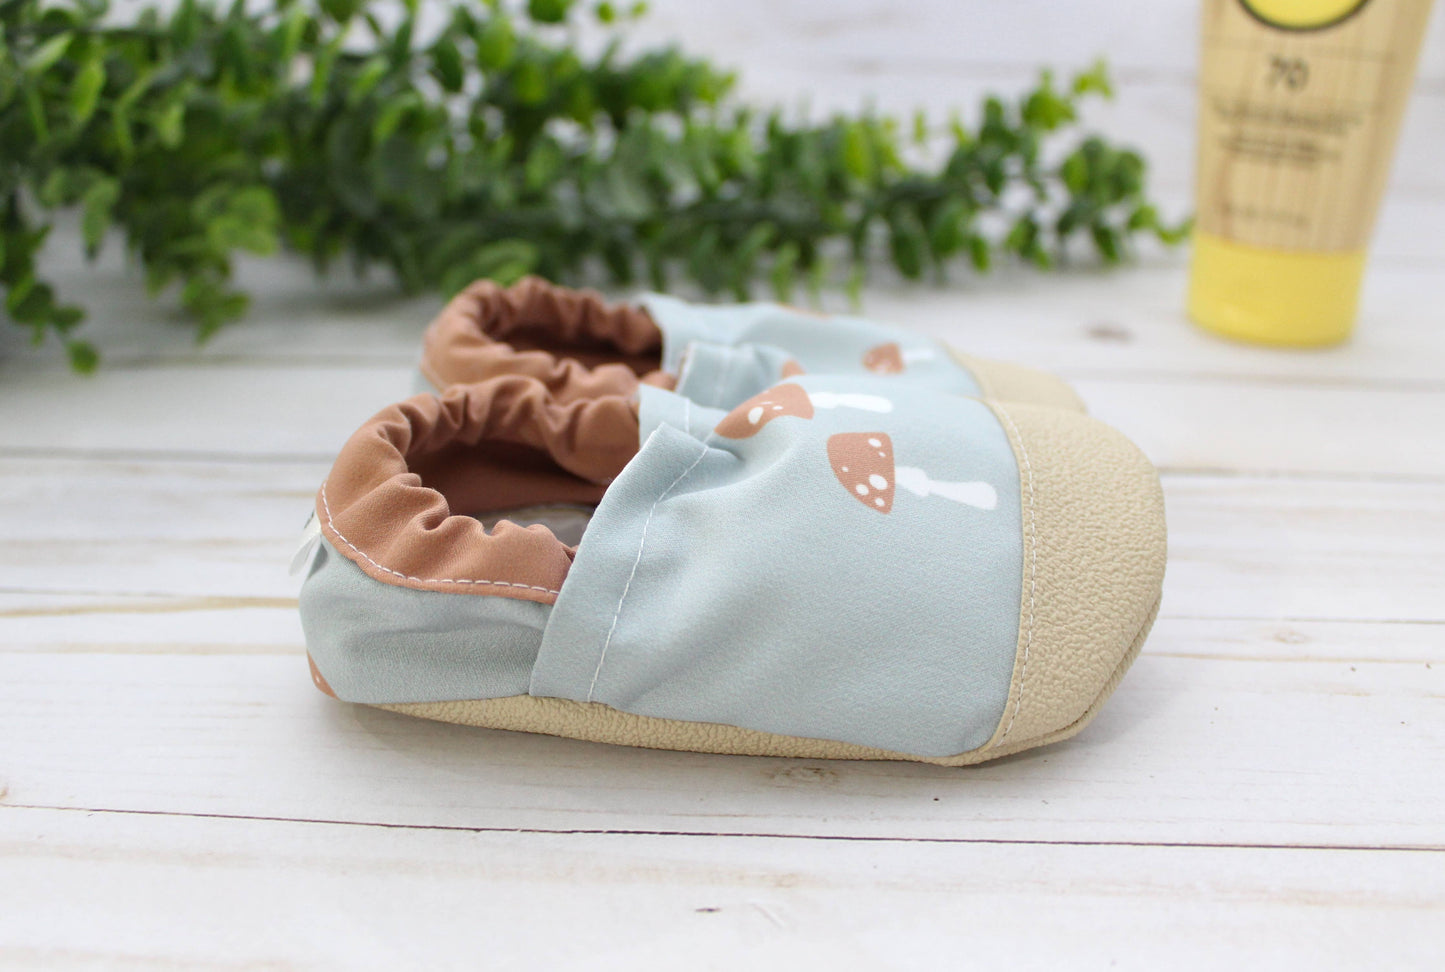 Scooter Booties - Mushroom Baby Water Shoes